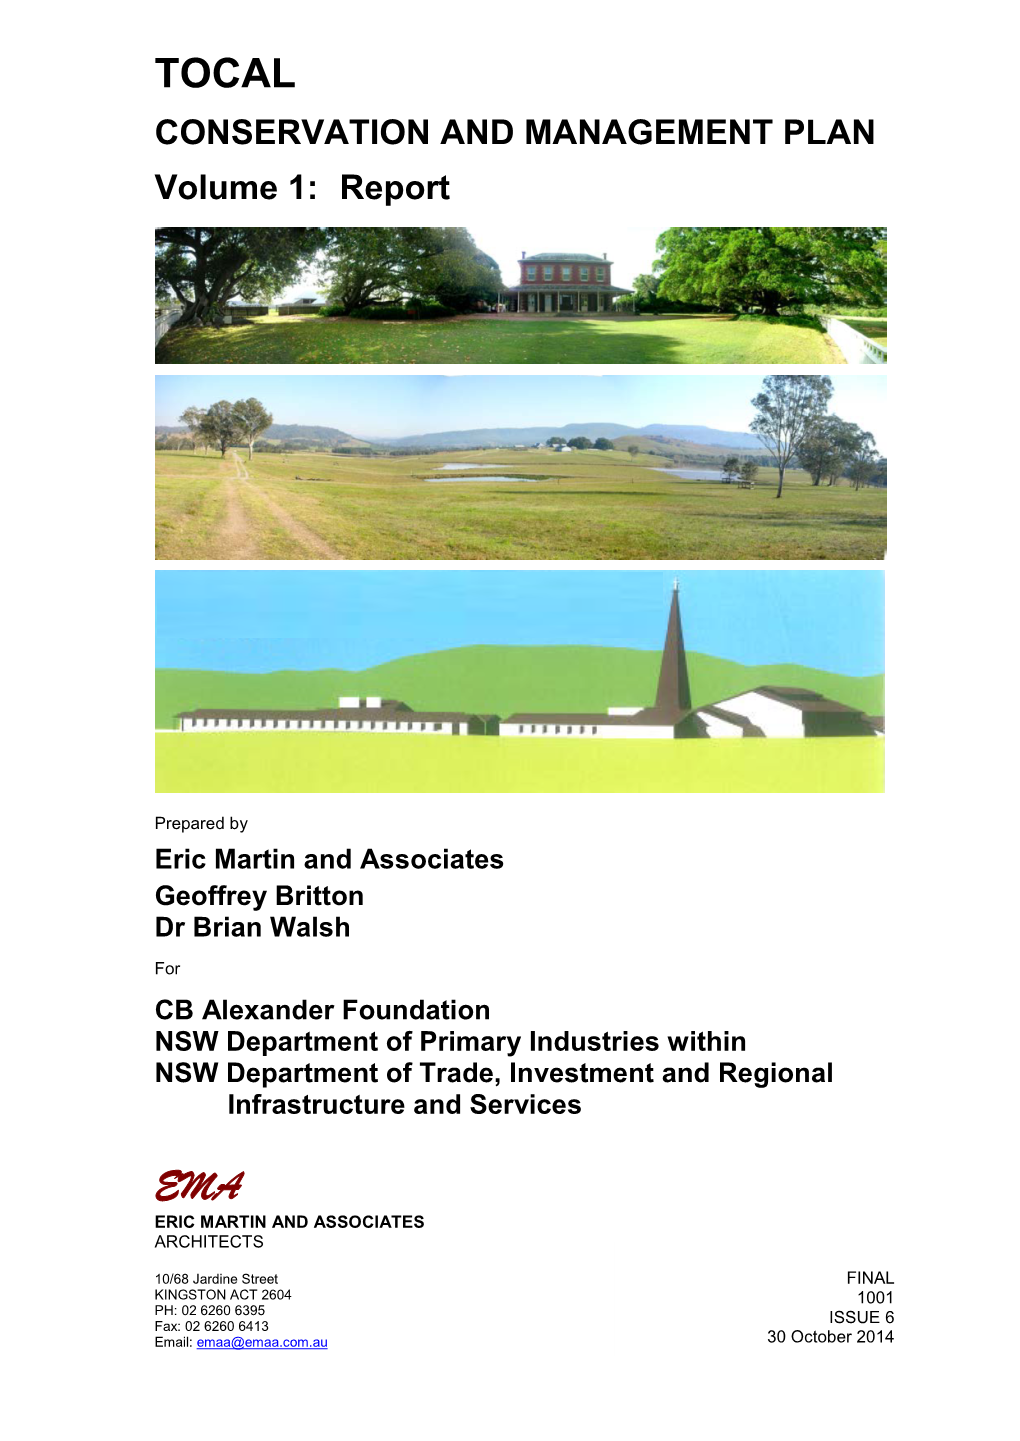 Tocal Conservation and Management Plan Volume 1